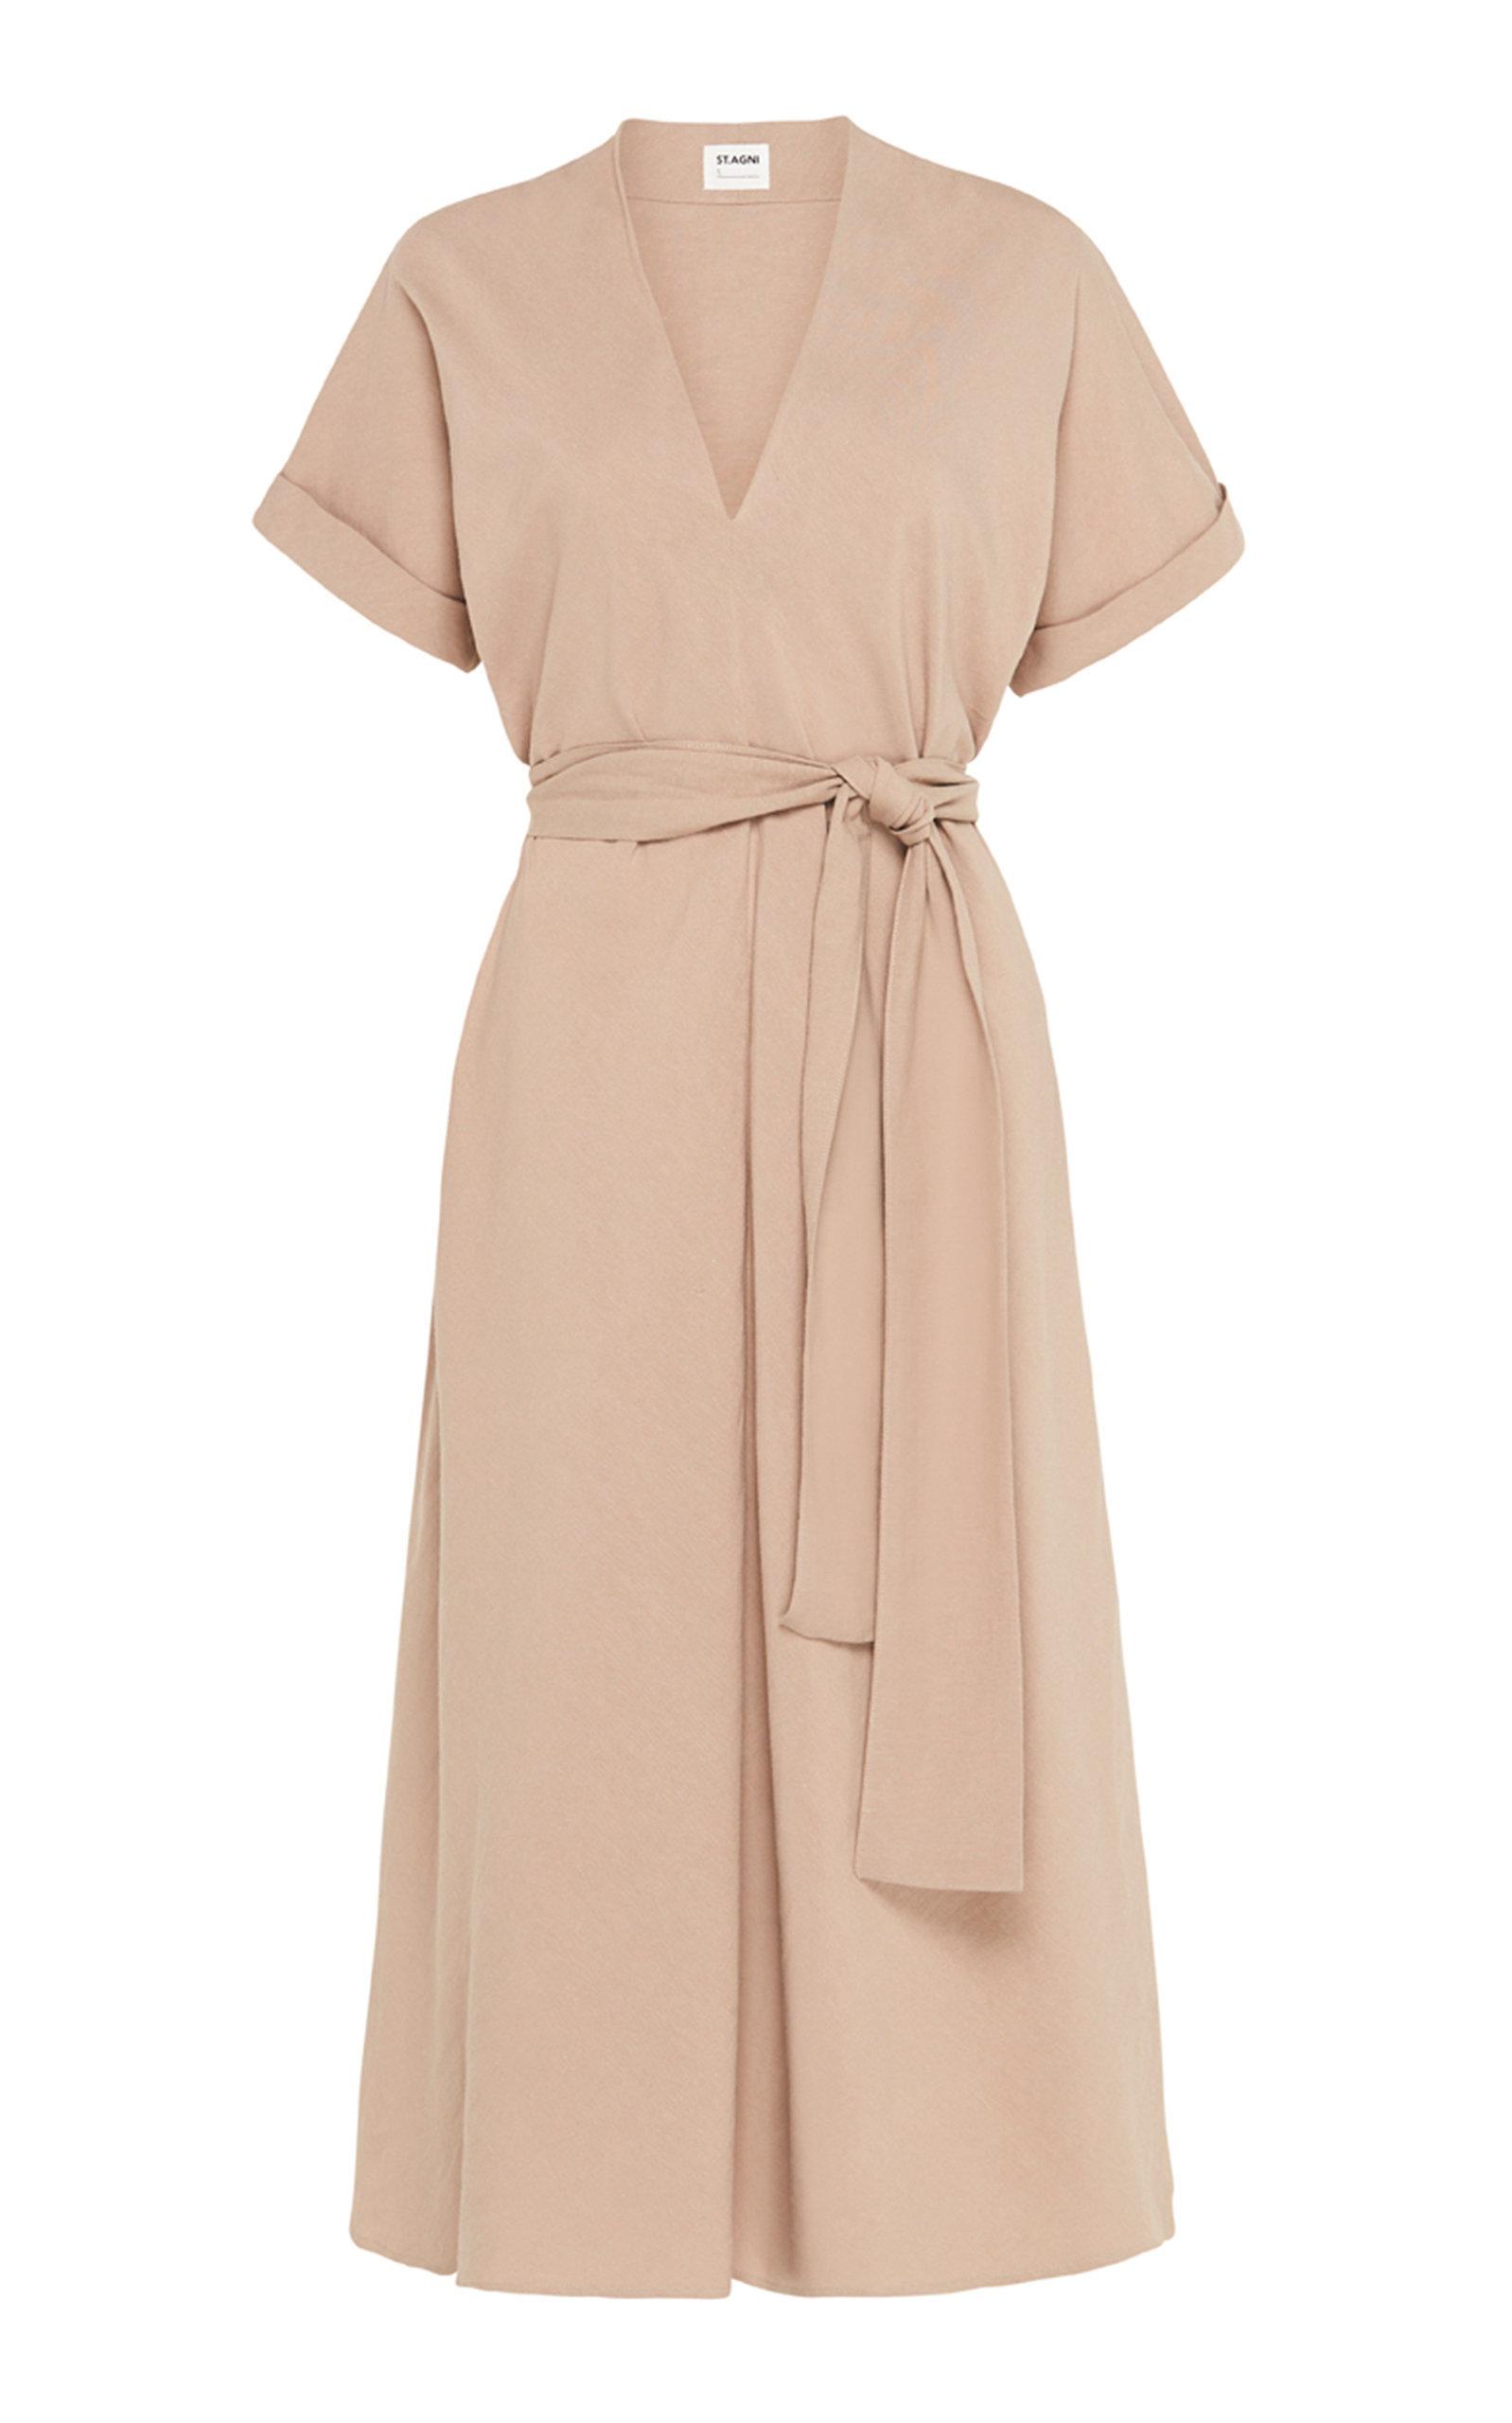 St. Agni Synthetic Abel Dress in Natural - Lyst